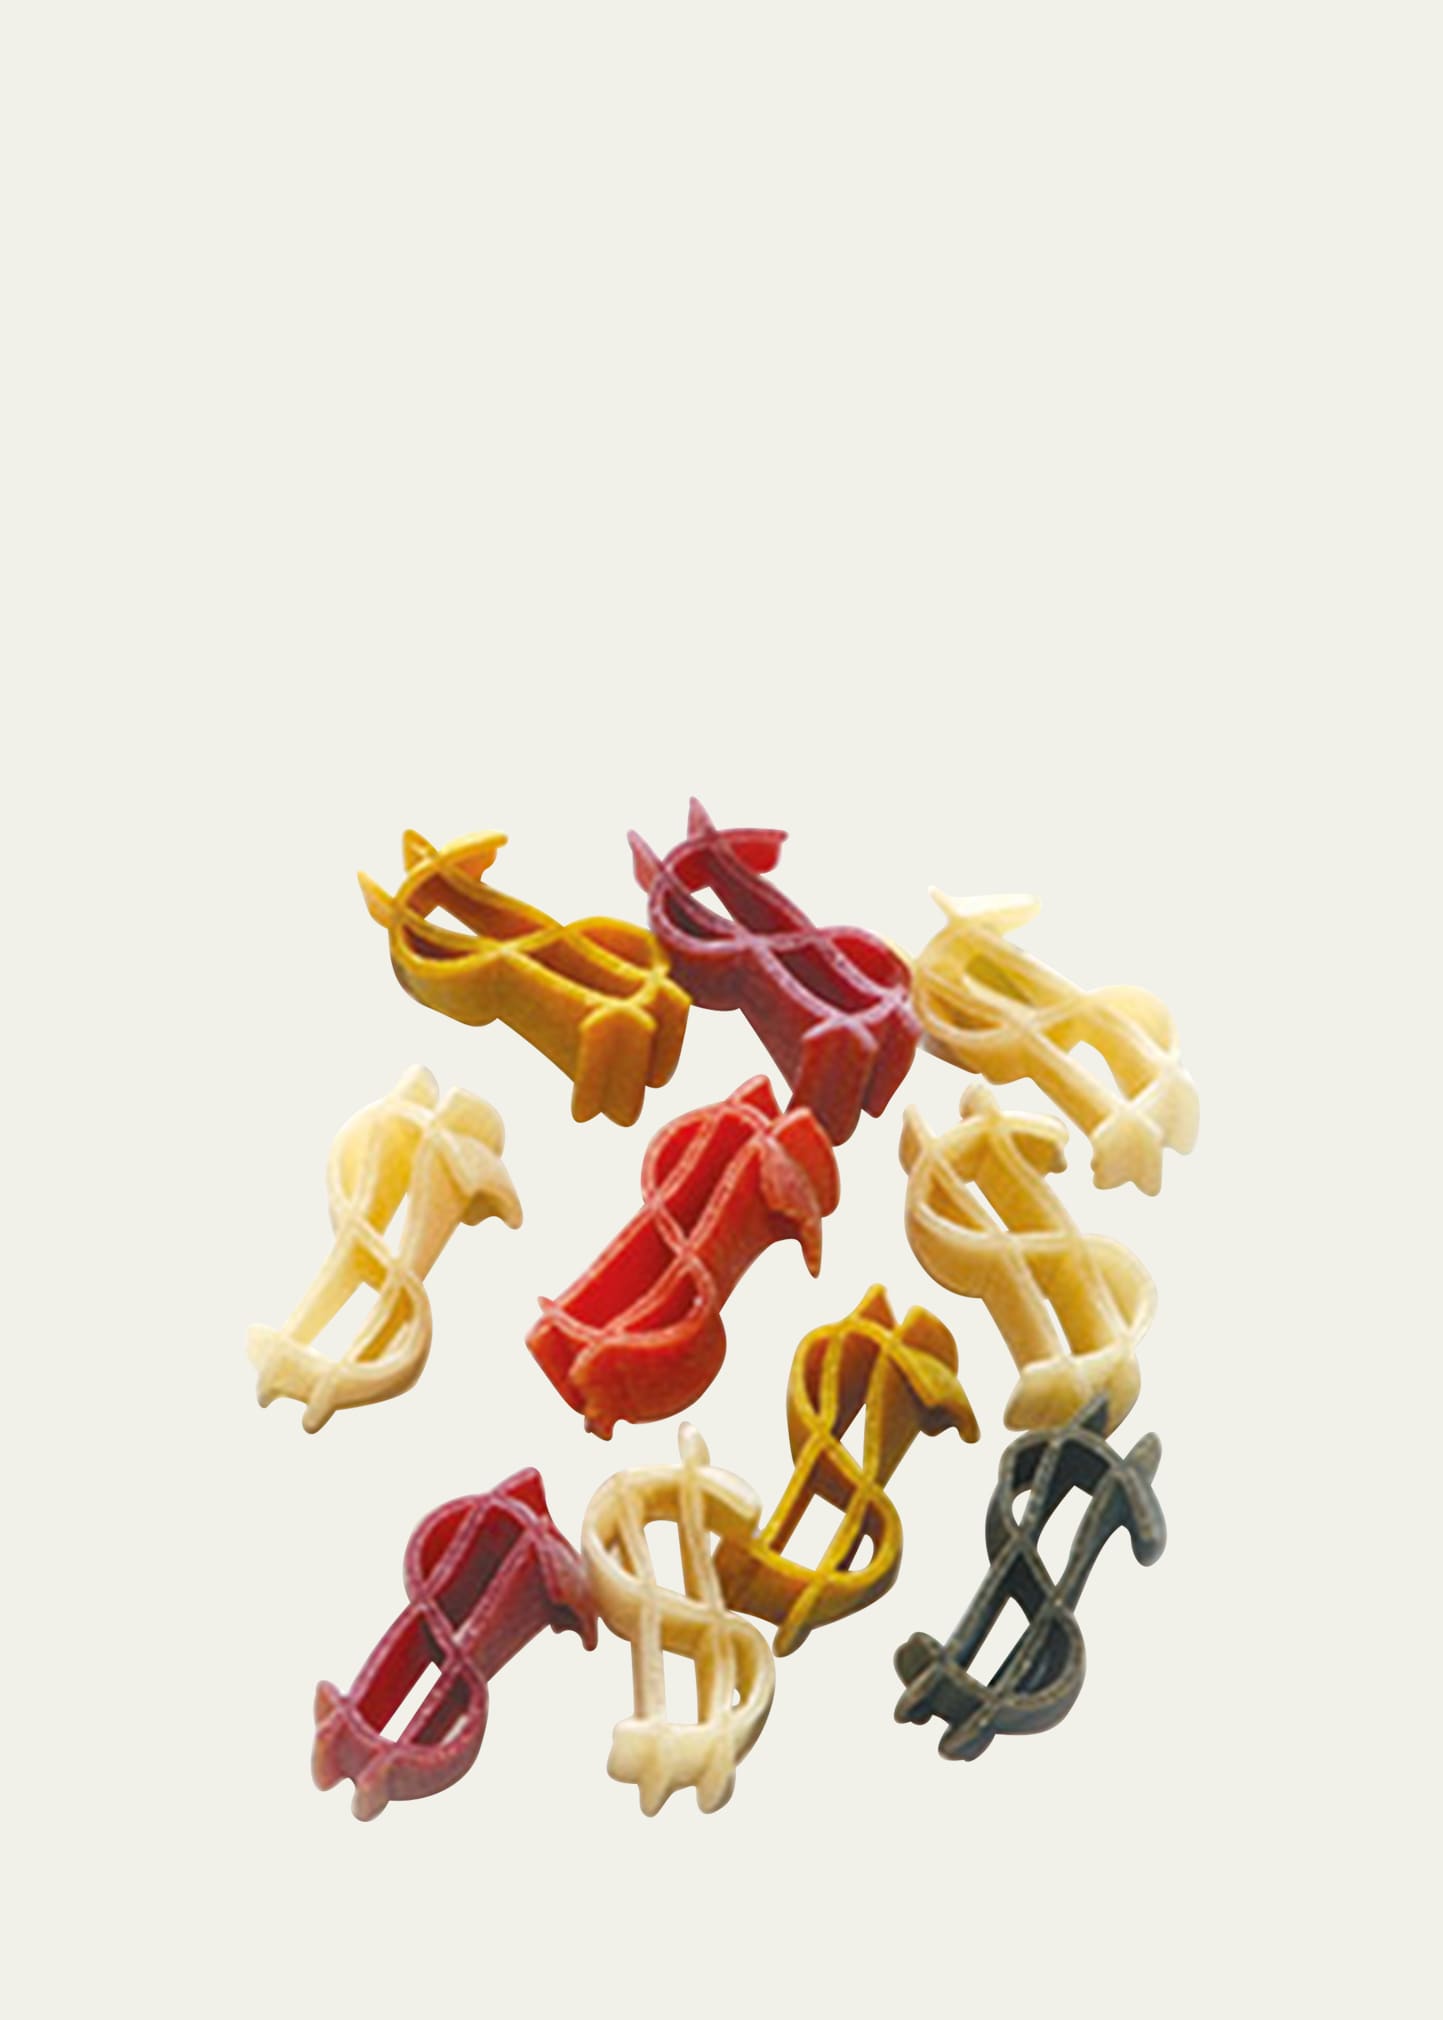 Dollar Sign Multi-Colored Pasta Noodles